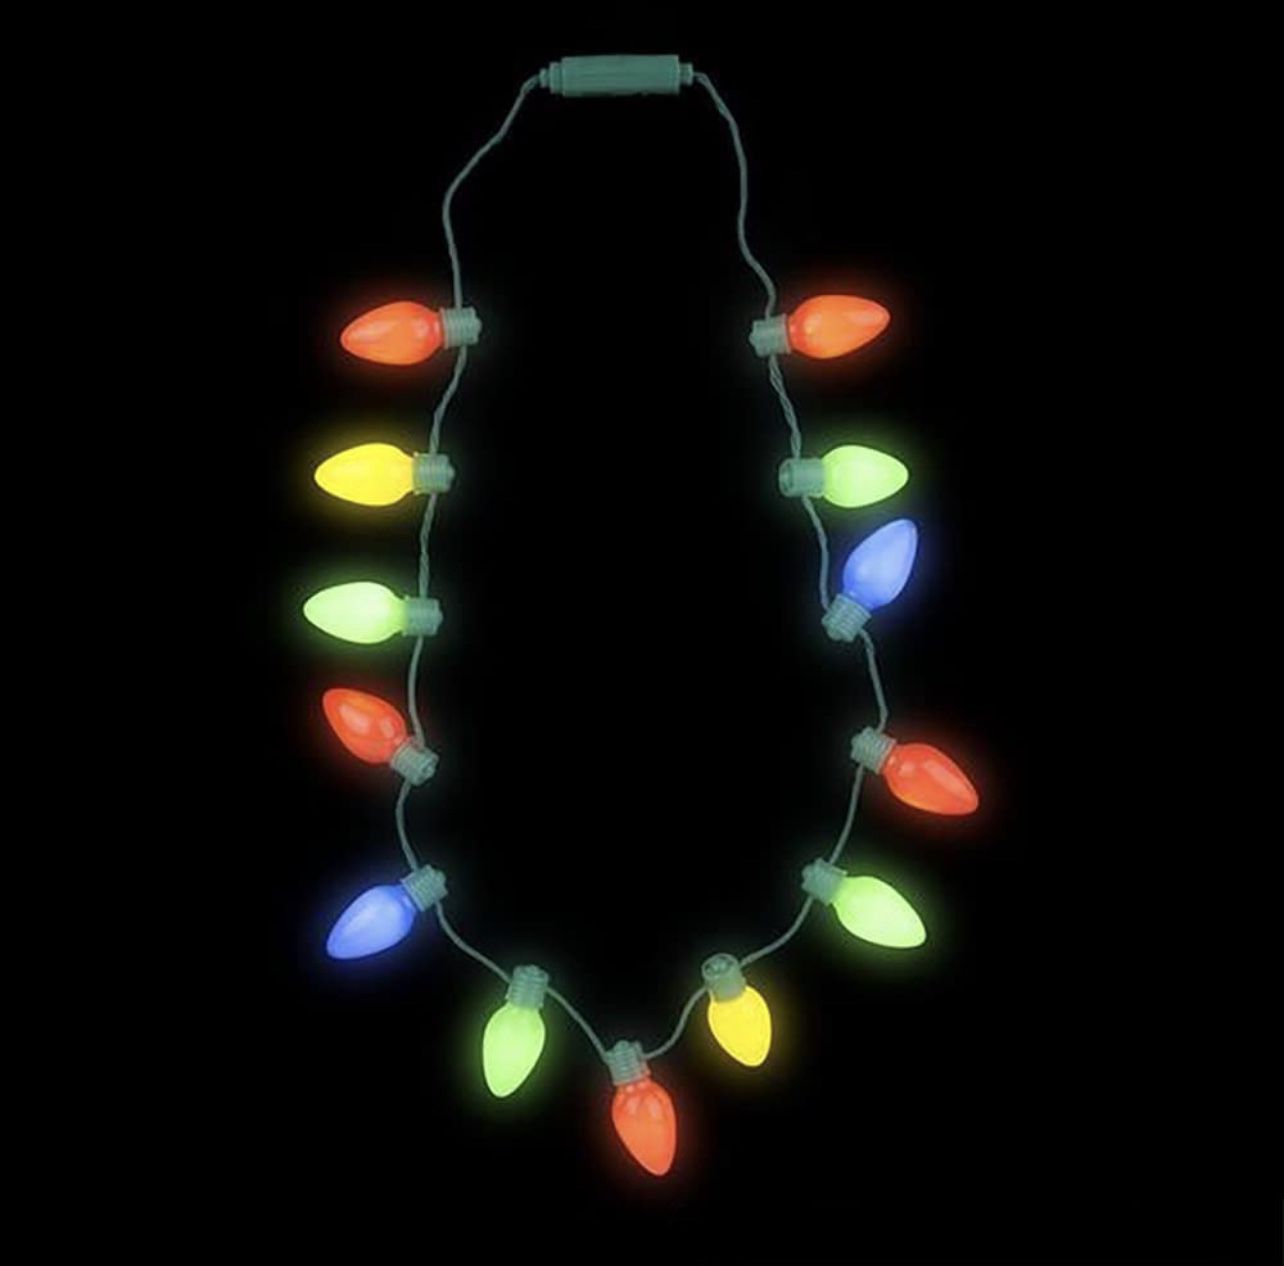 LED Light Up Christmas Bulb Necklace Party Favors 4 Pack 13 Bulbs